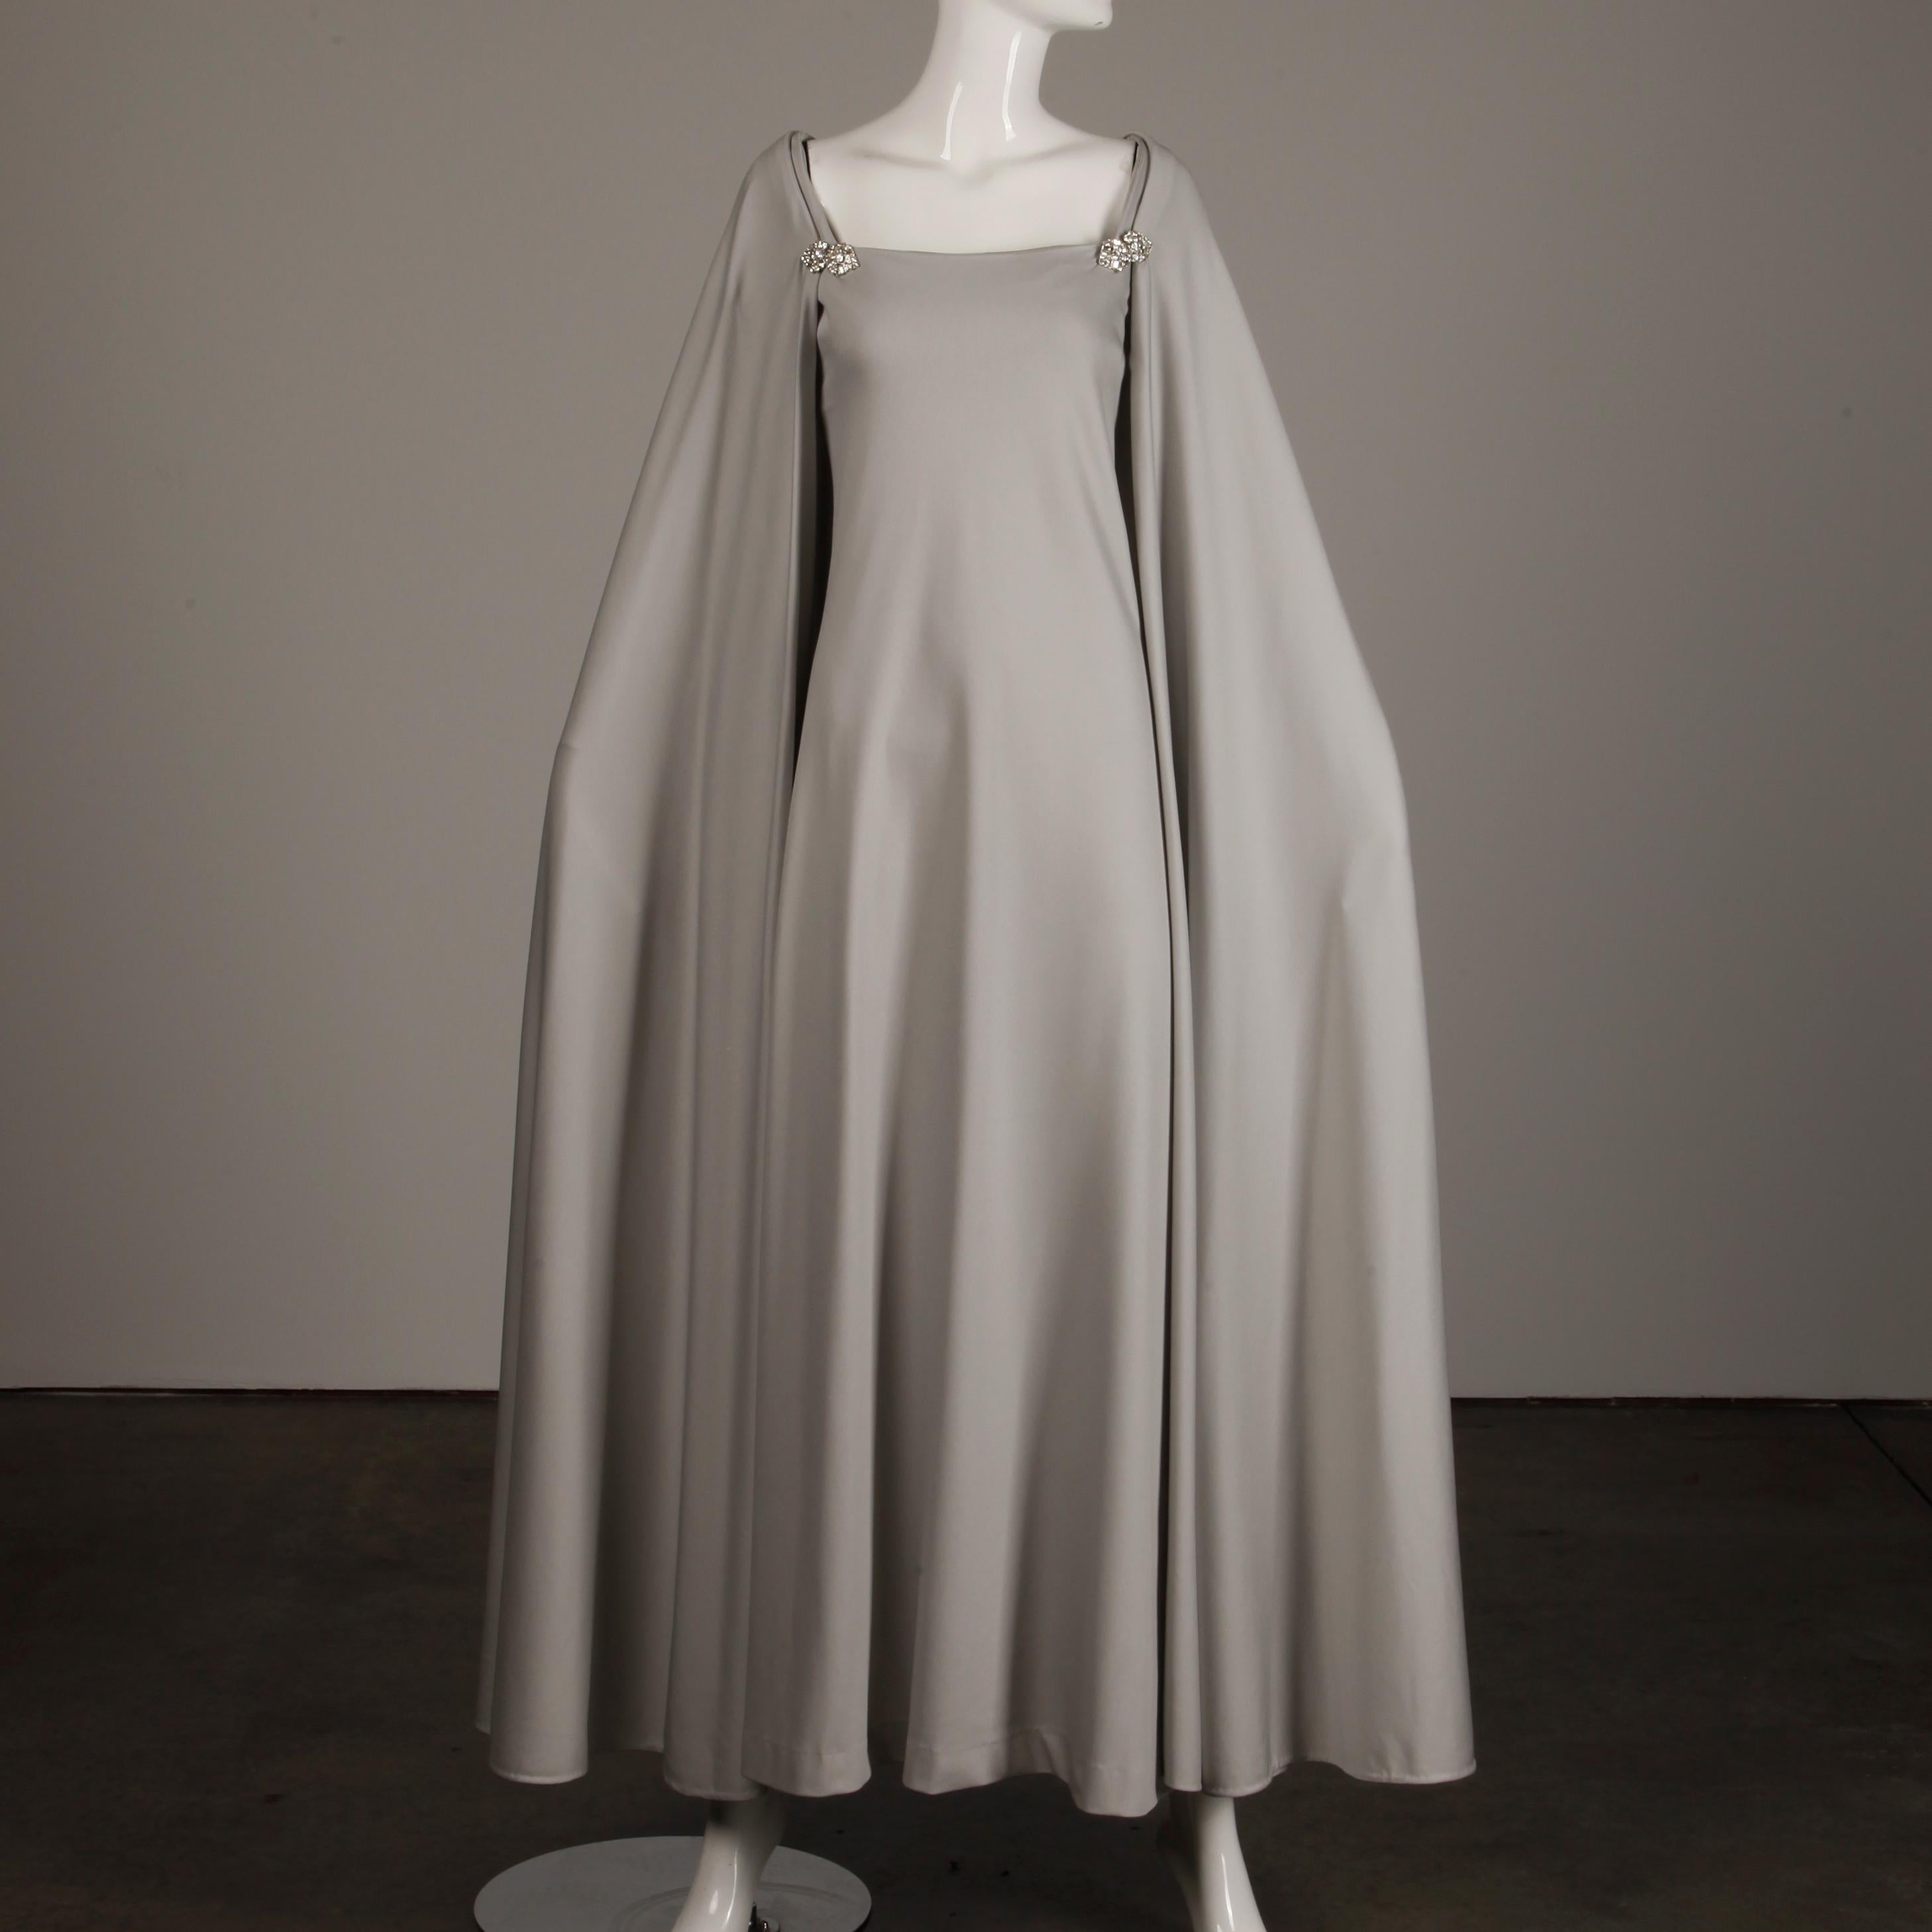 Women's 1970s Rona Vintage Gray Jersey Knit Dress/ Gown with Detachable Rhinestone Cape